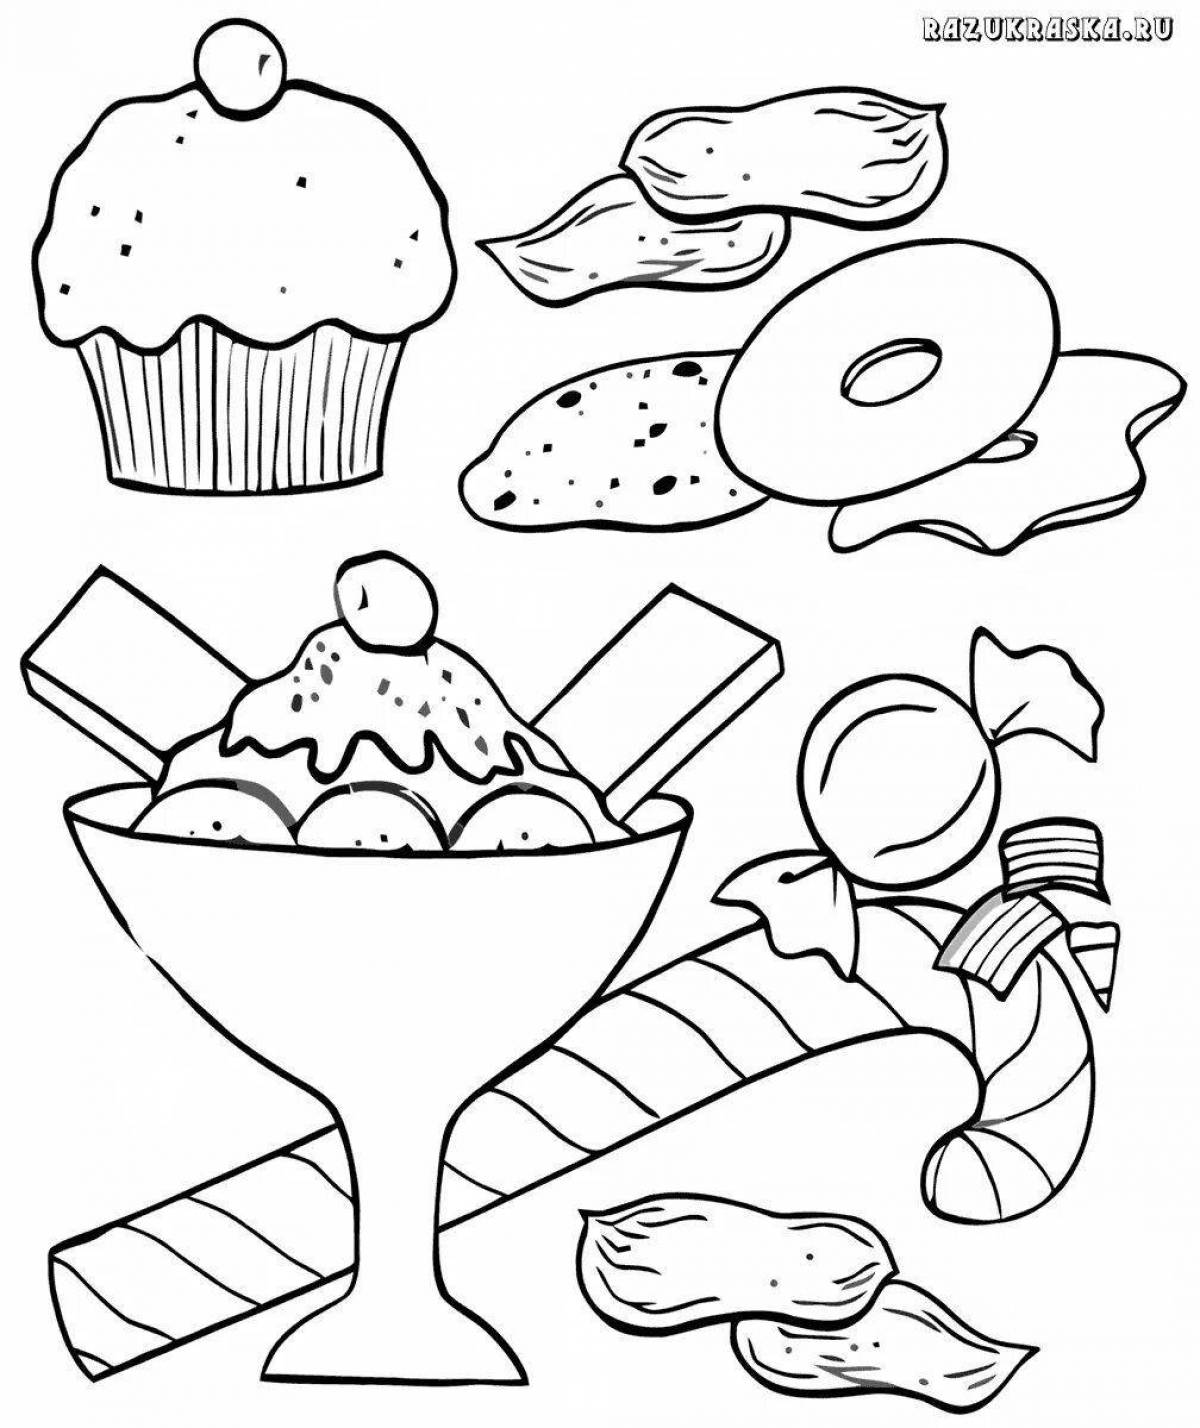 Colorful coloring page for kids with food